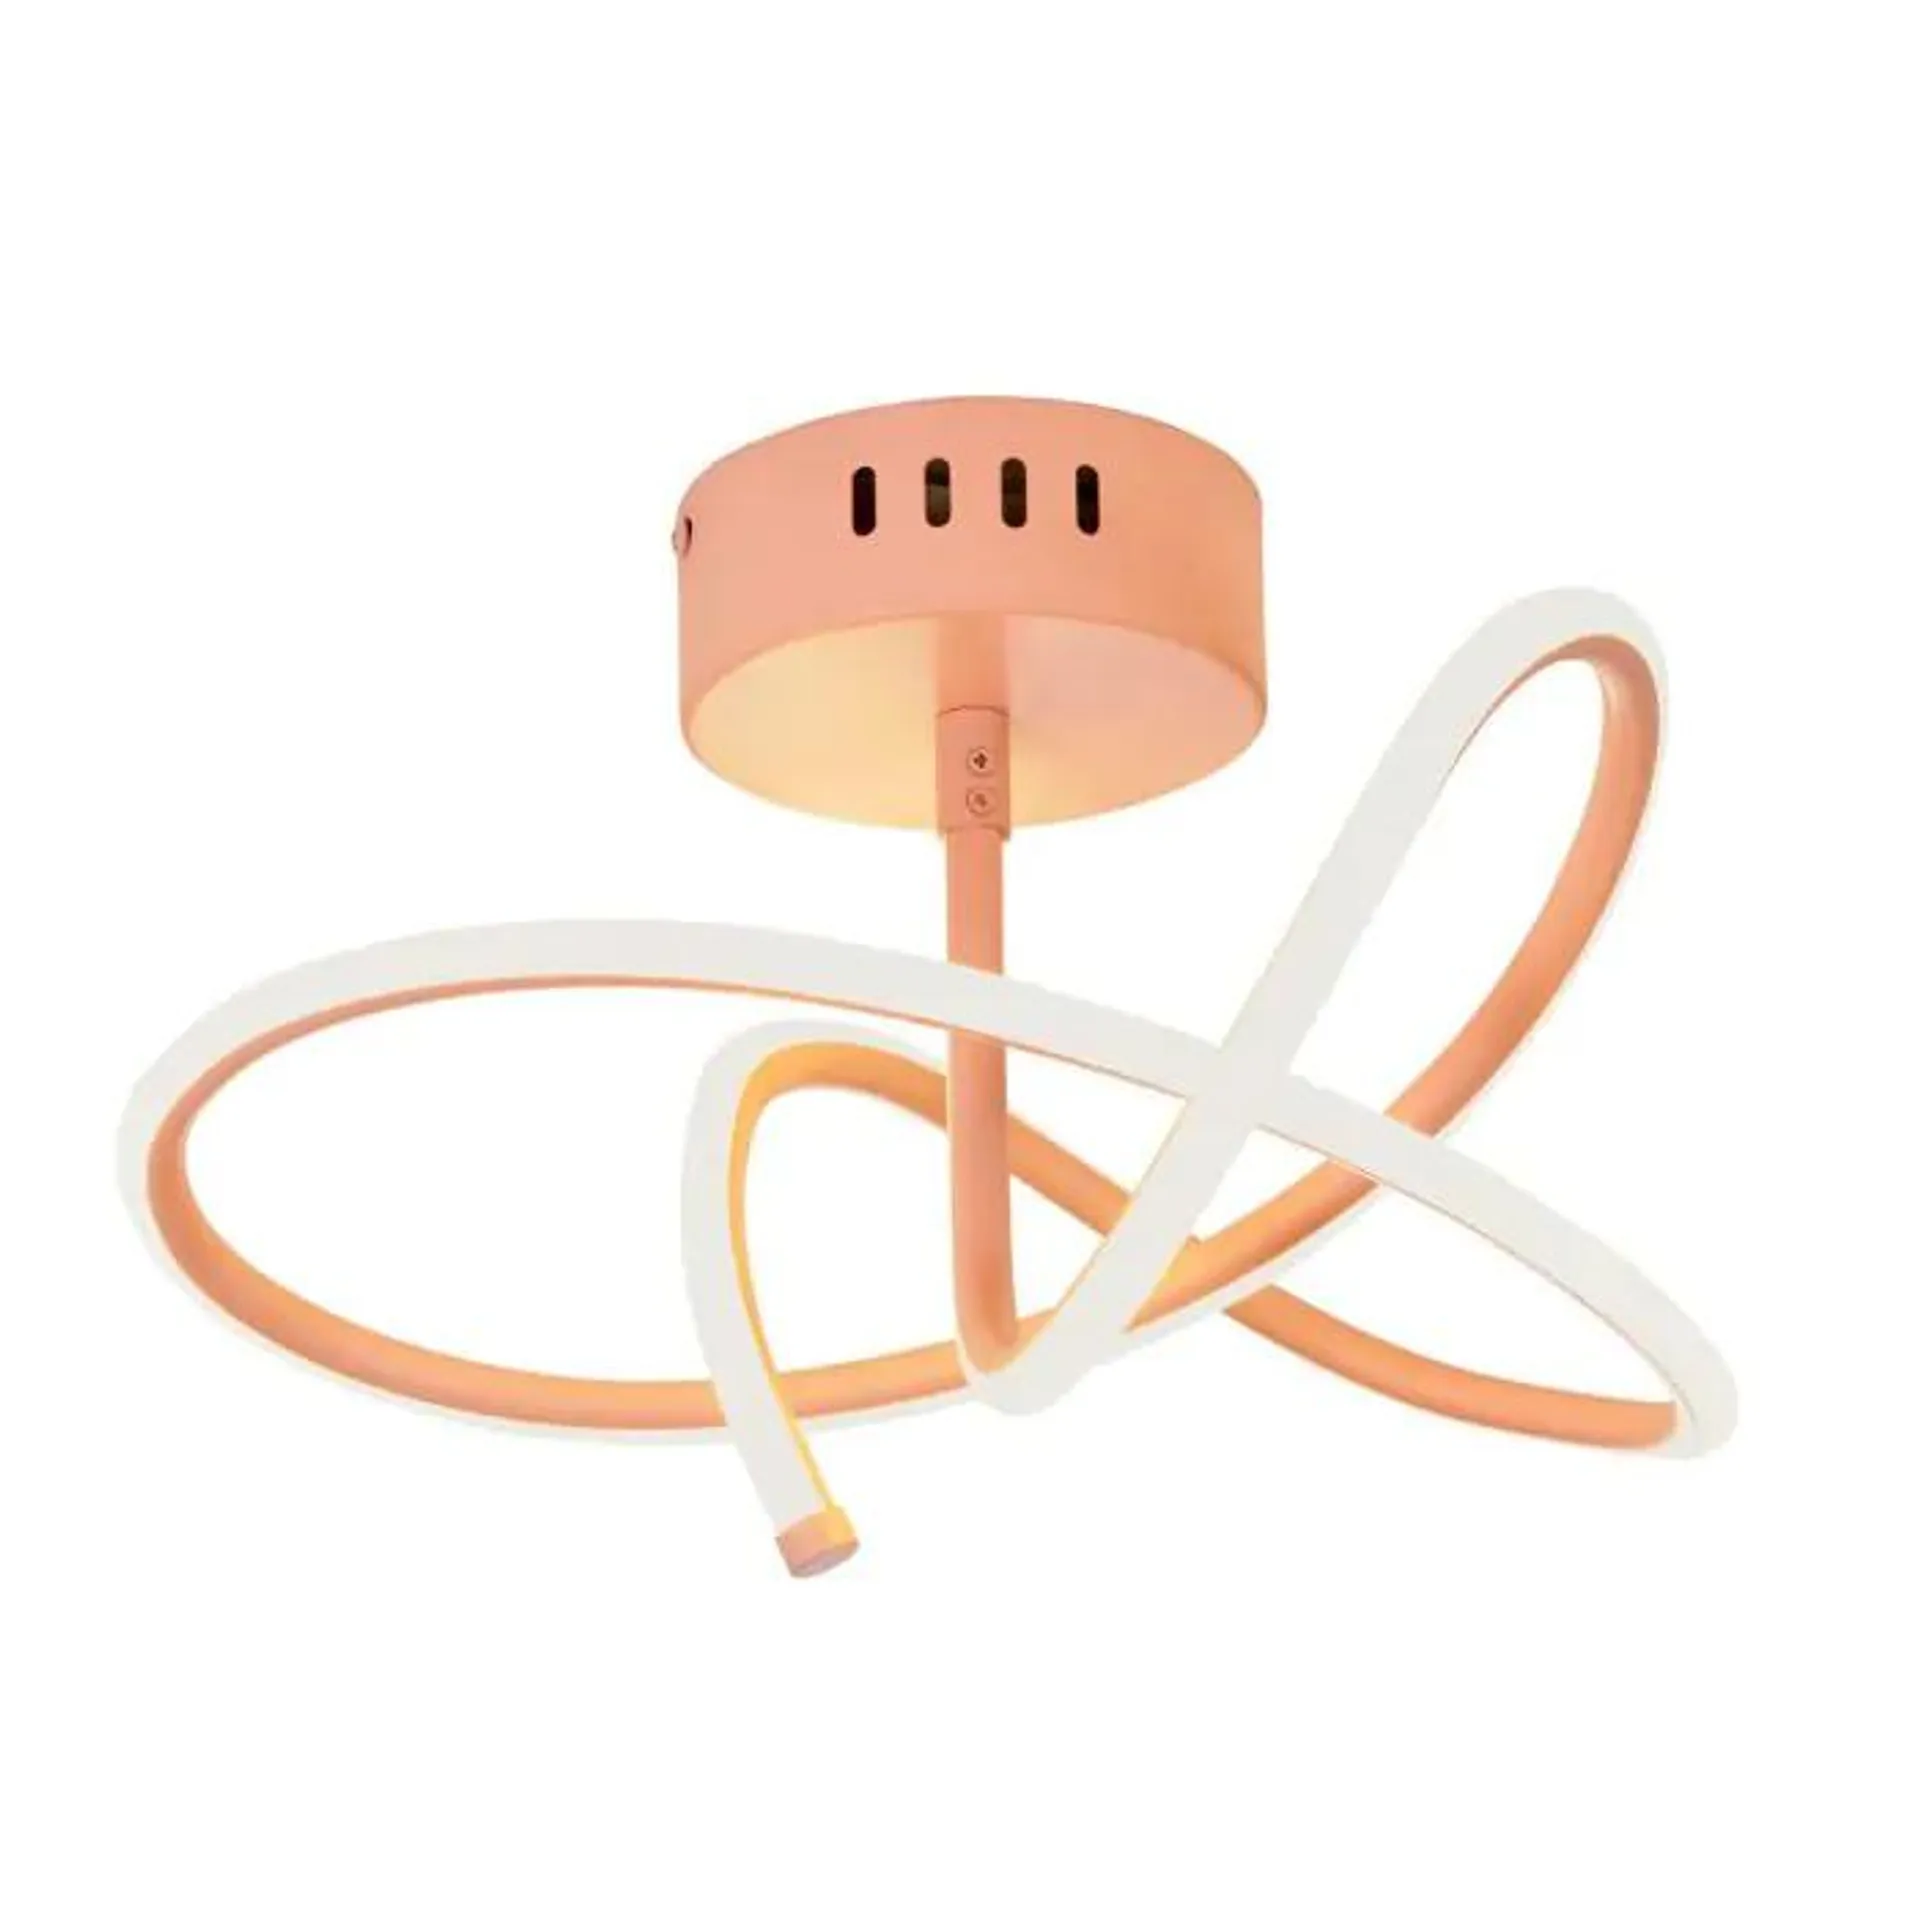 Glow Whirly Ceiling Light, Pink